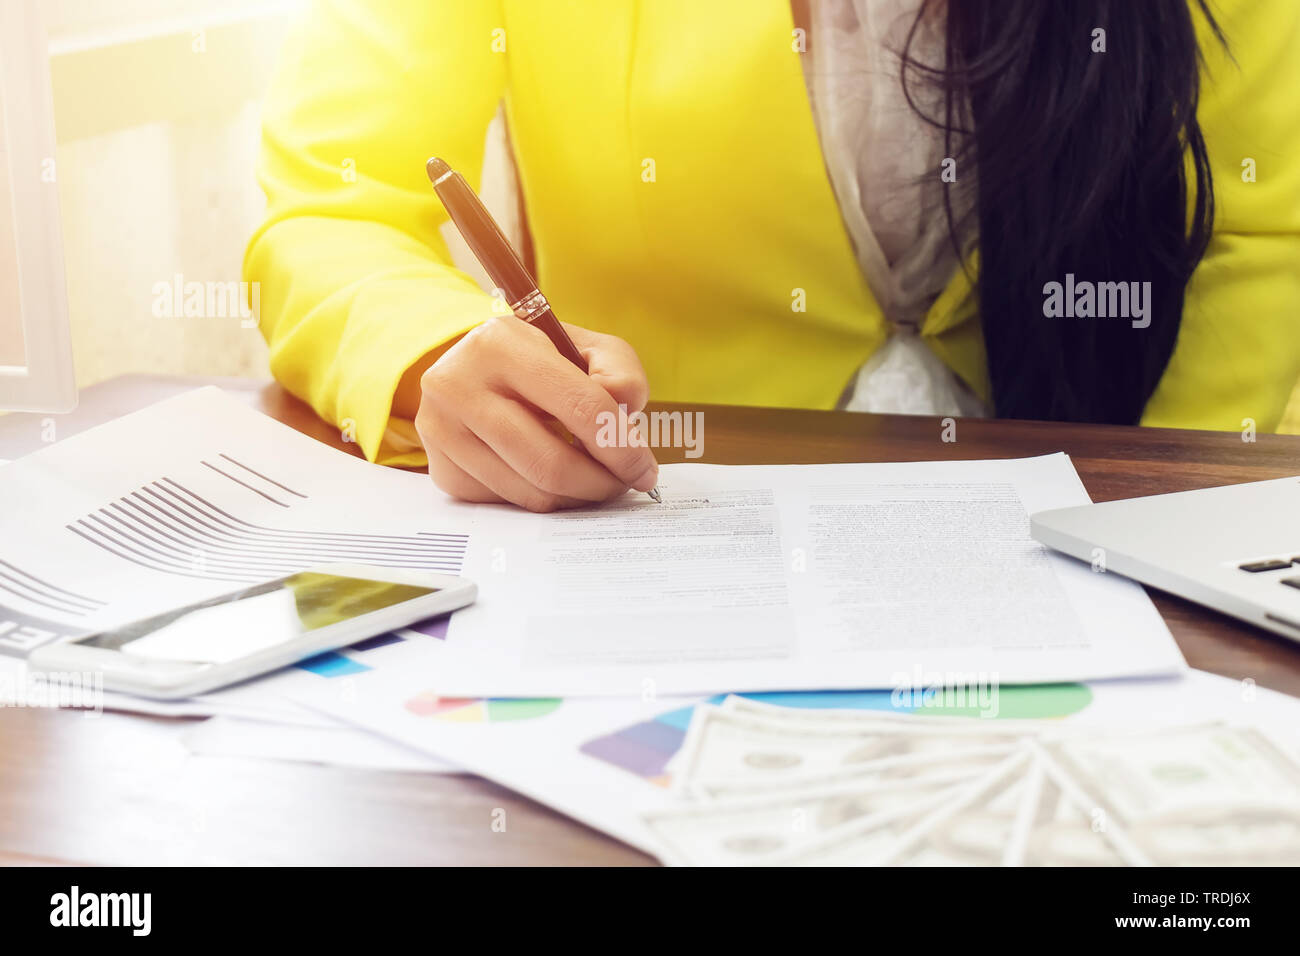 business woman hand signing a contract, close up. contract agreement or business deal concept Stock Photo